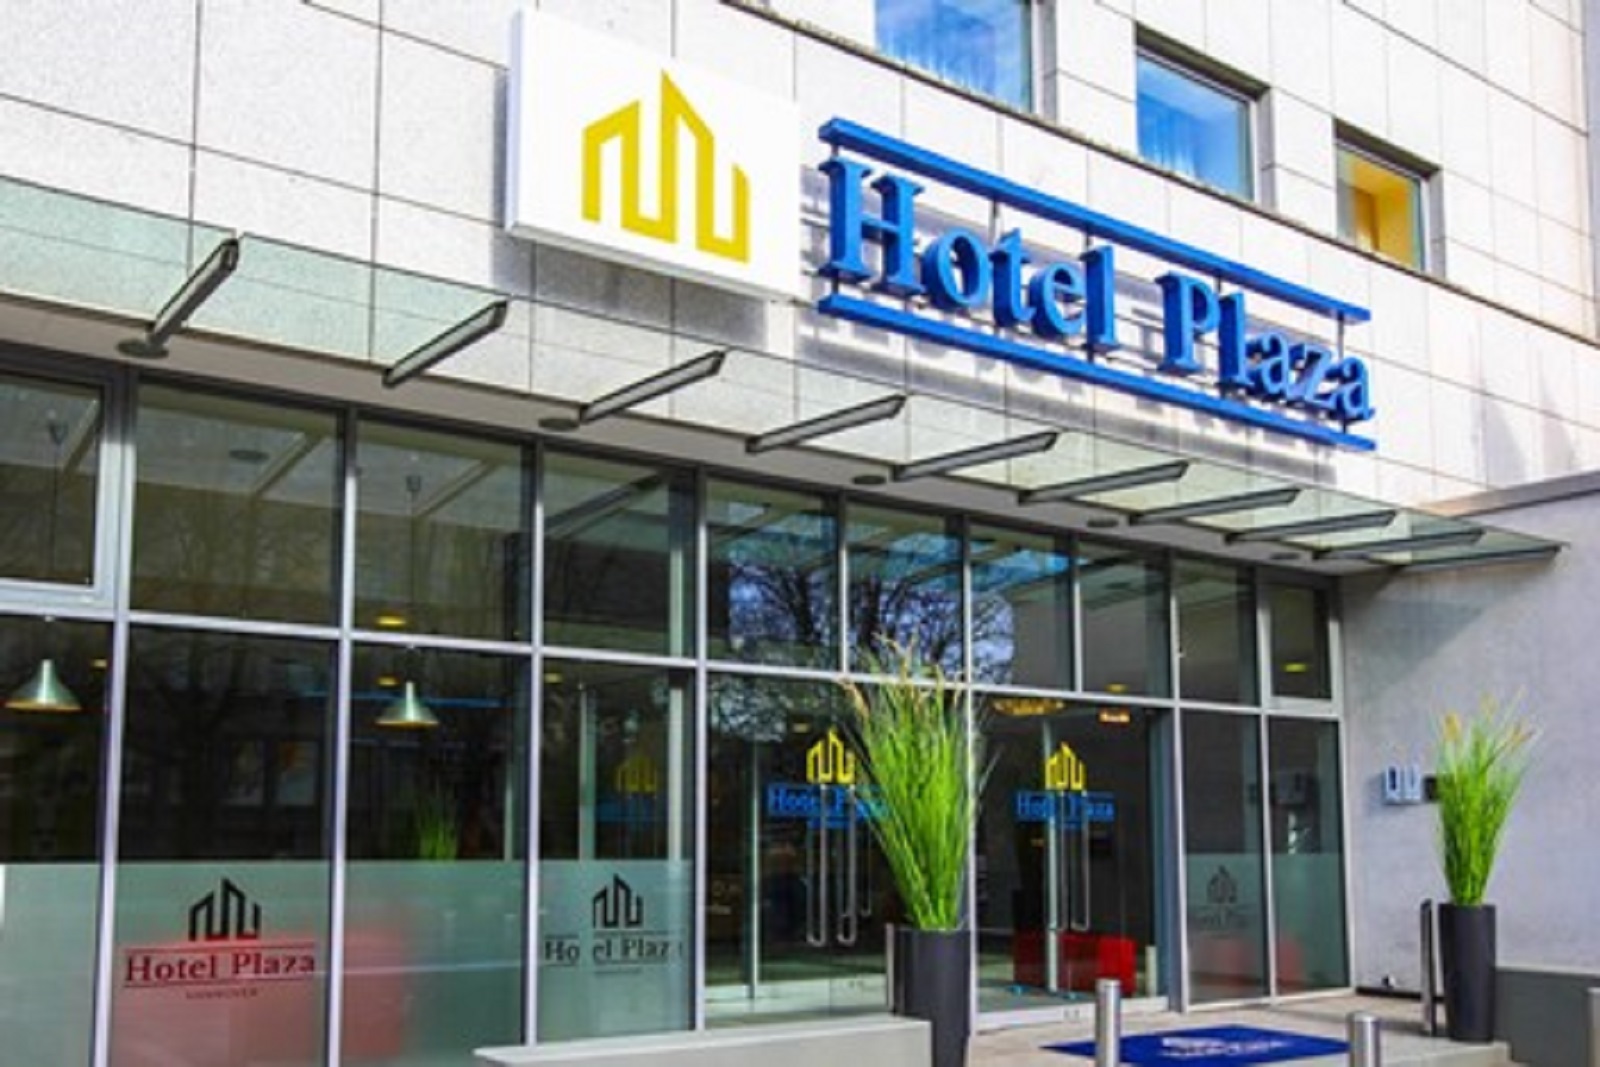 Hotel Plaza Hannover <br/>82.50 ew <br/> <a href='http://vakantieoplossing.nl/outpage/?id=94422bc6a26e9e174fb14b1ab17a8d1c' target='_blank'>View Details</a>